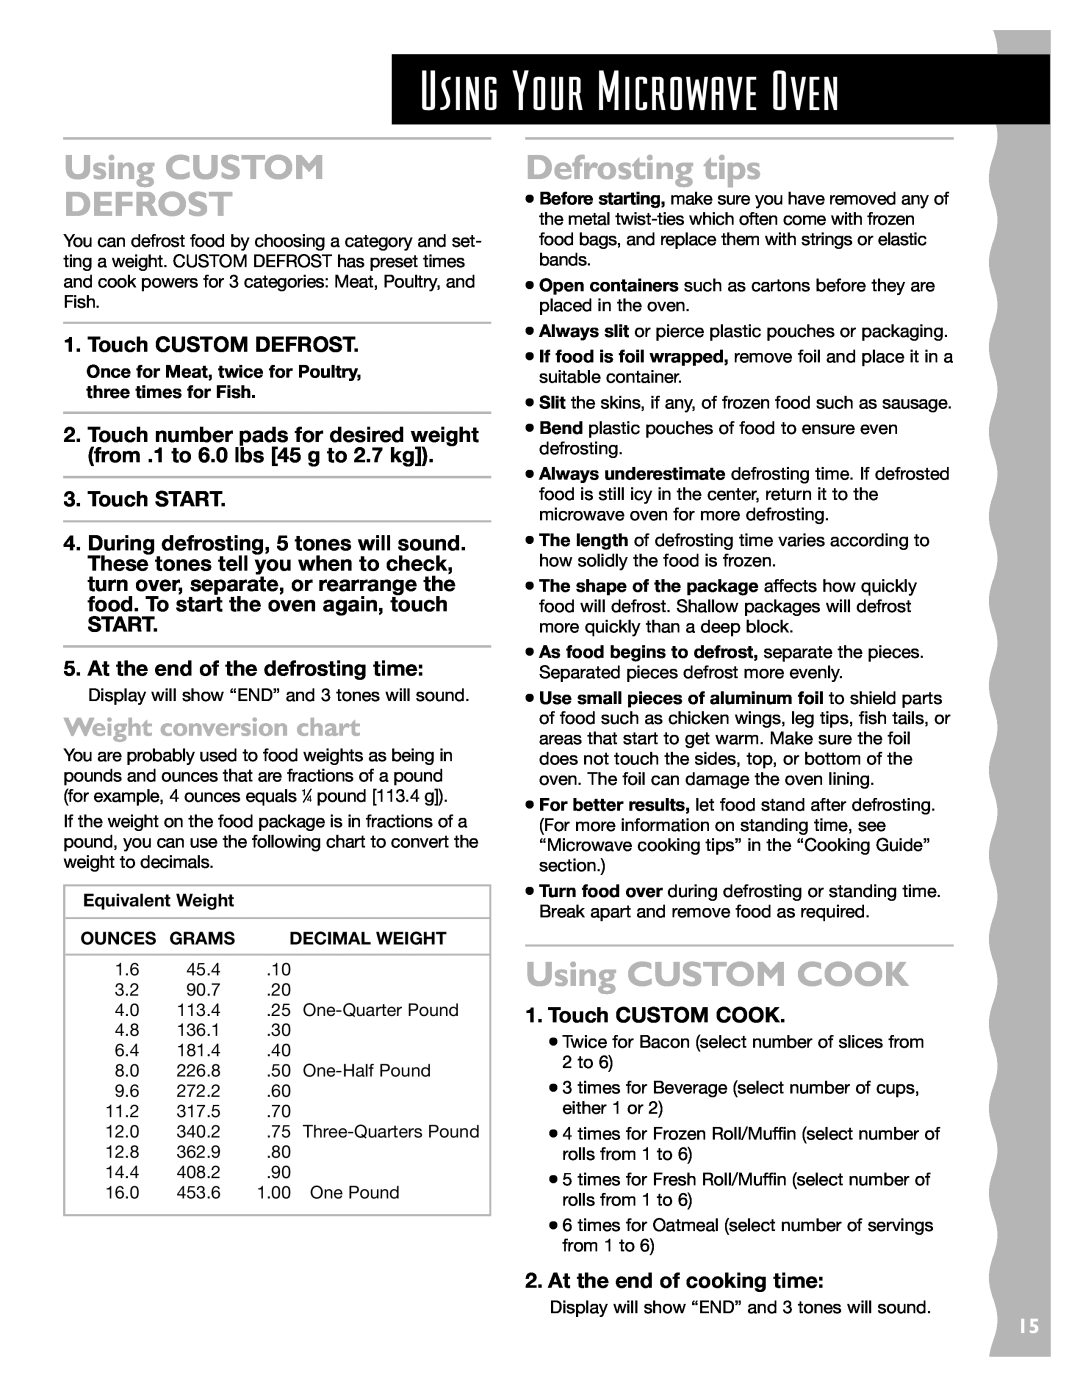 KitchenAid KCMS145JWH Using CUSTOM DEFROST, Defrosting tips, Using CUSTOM COOK, Weight conversion chart, Touch START 